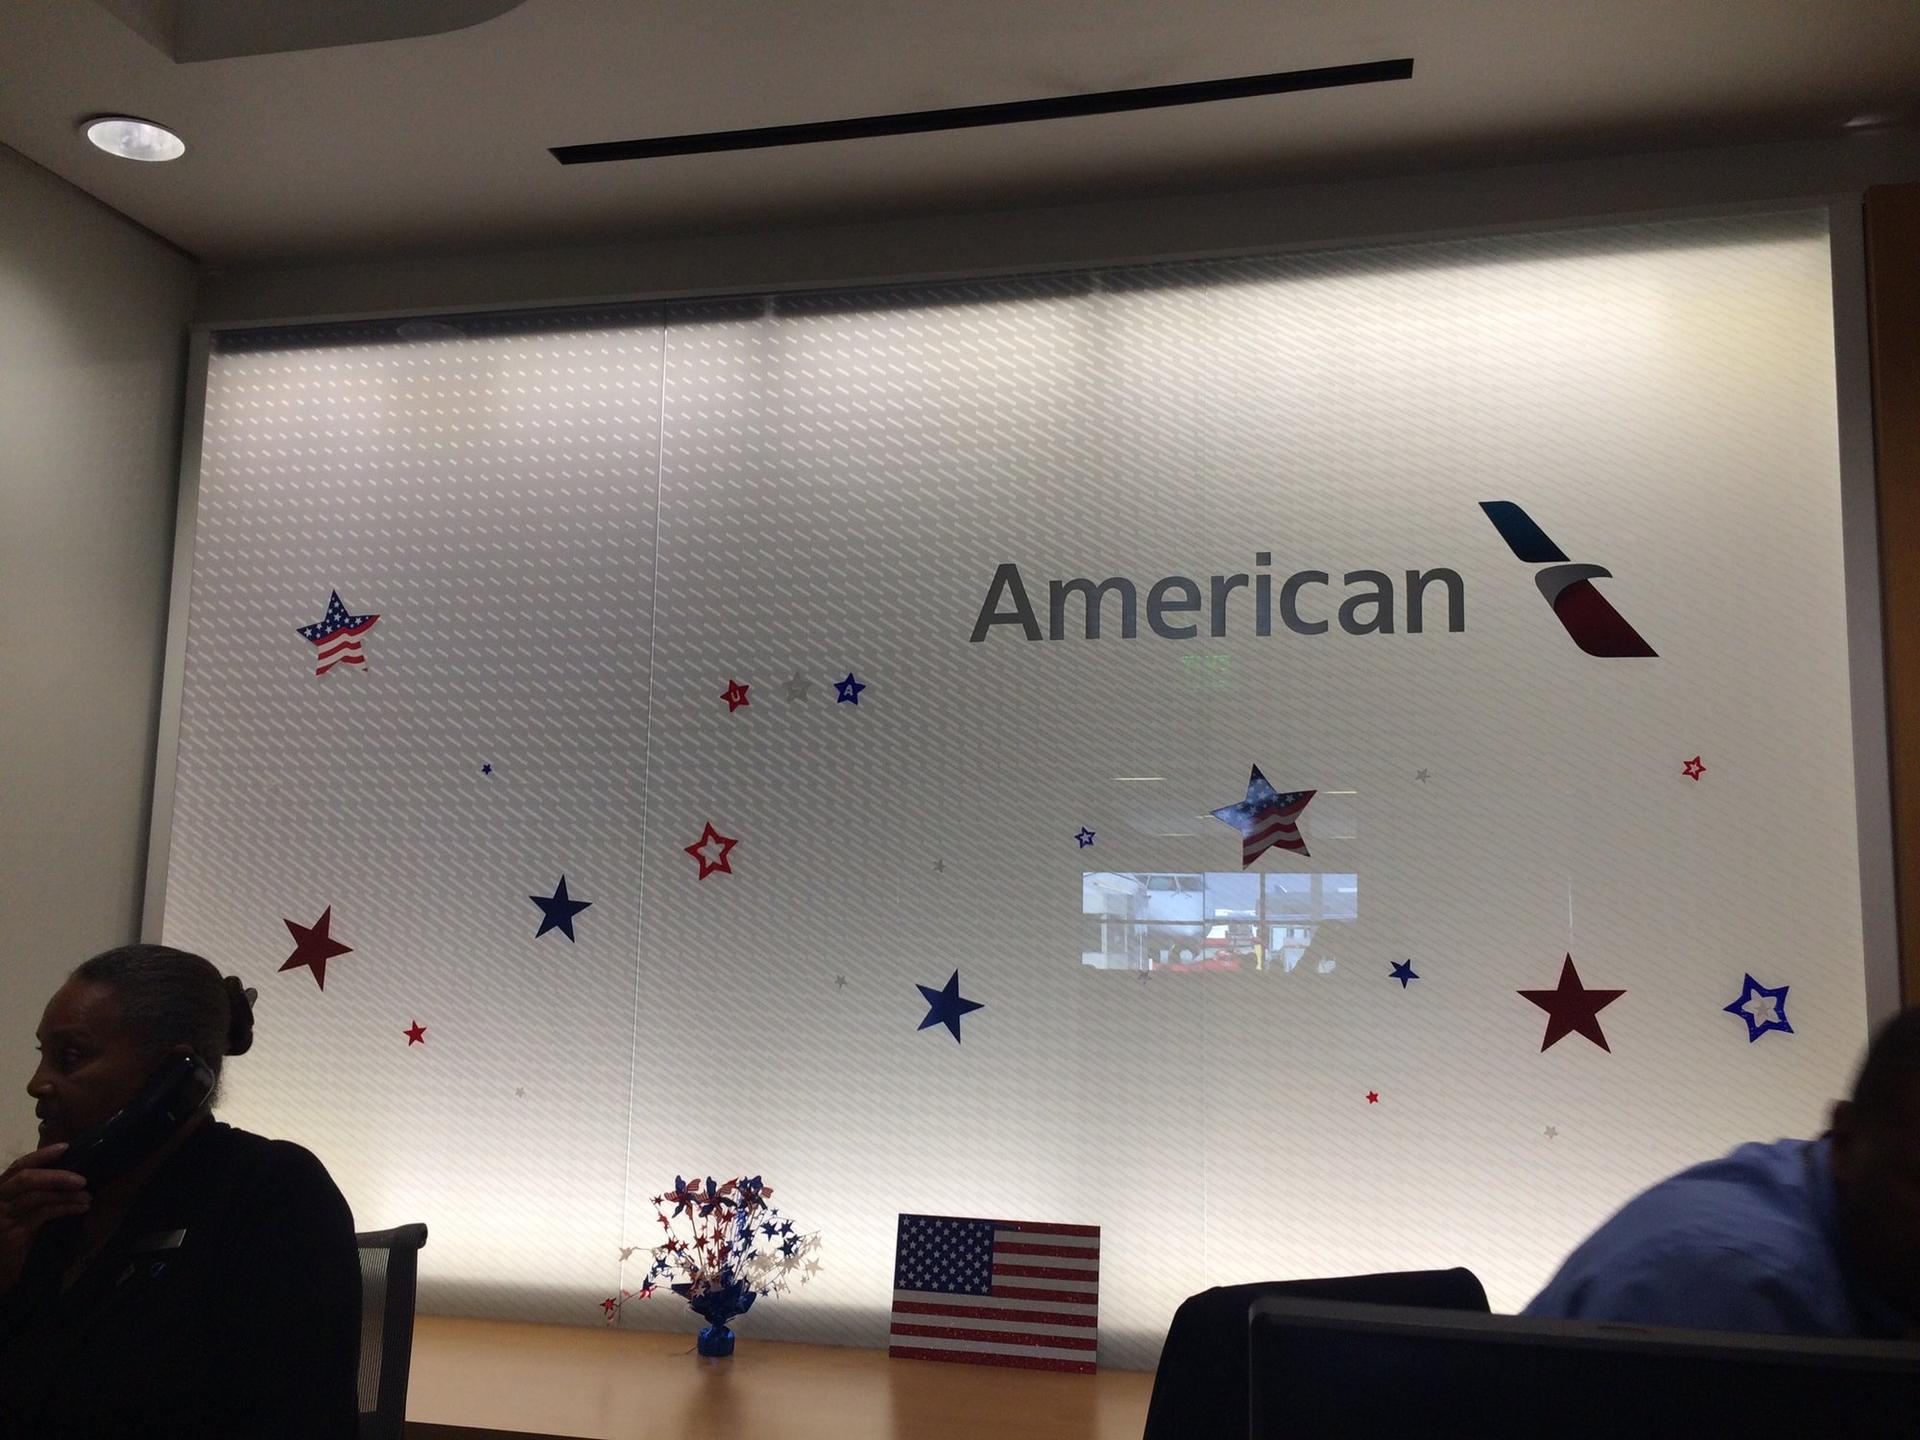 American Airlines Admirals Club image 15 of 43